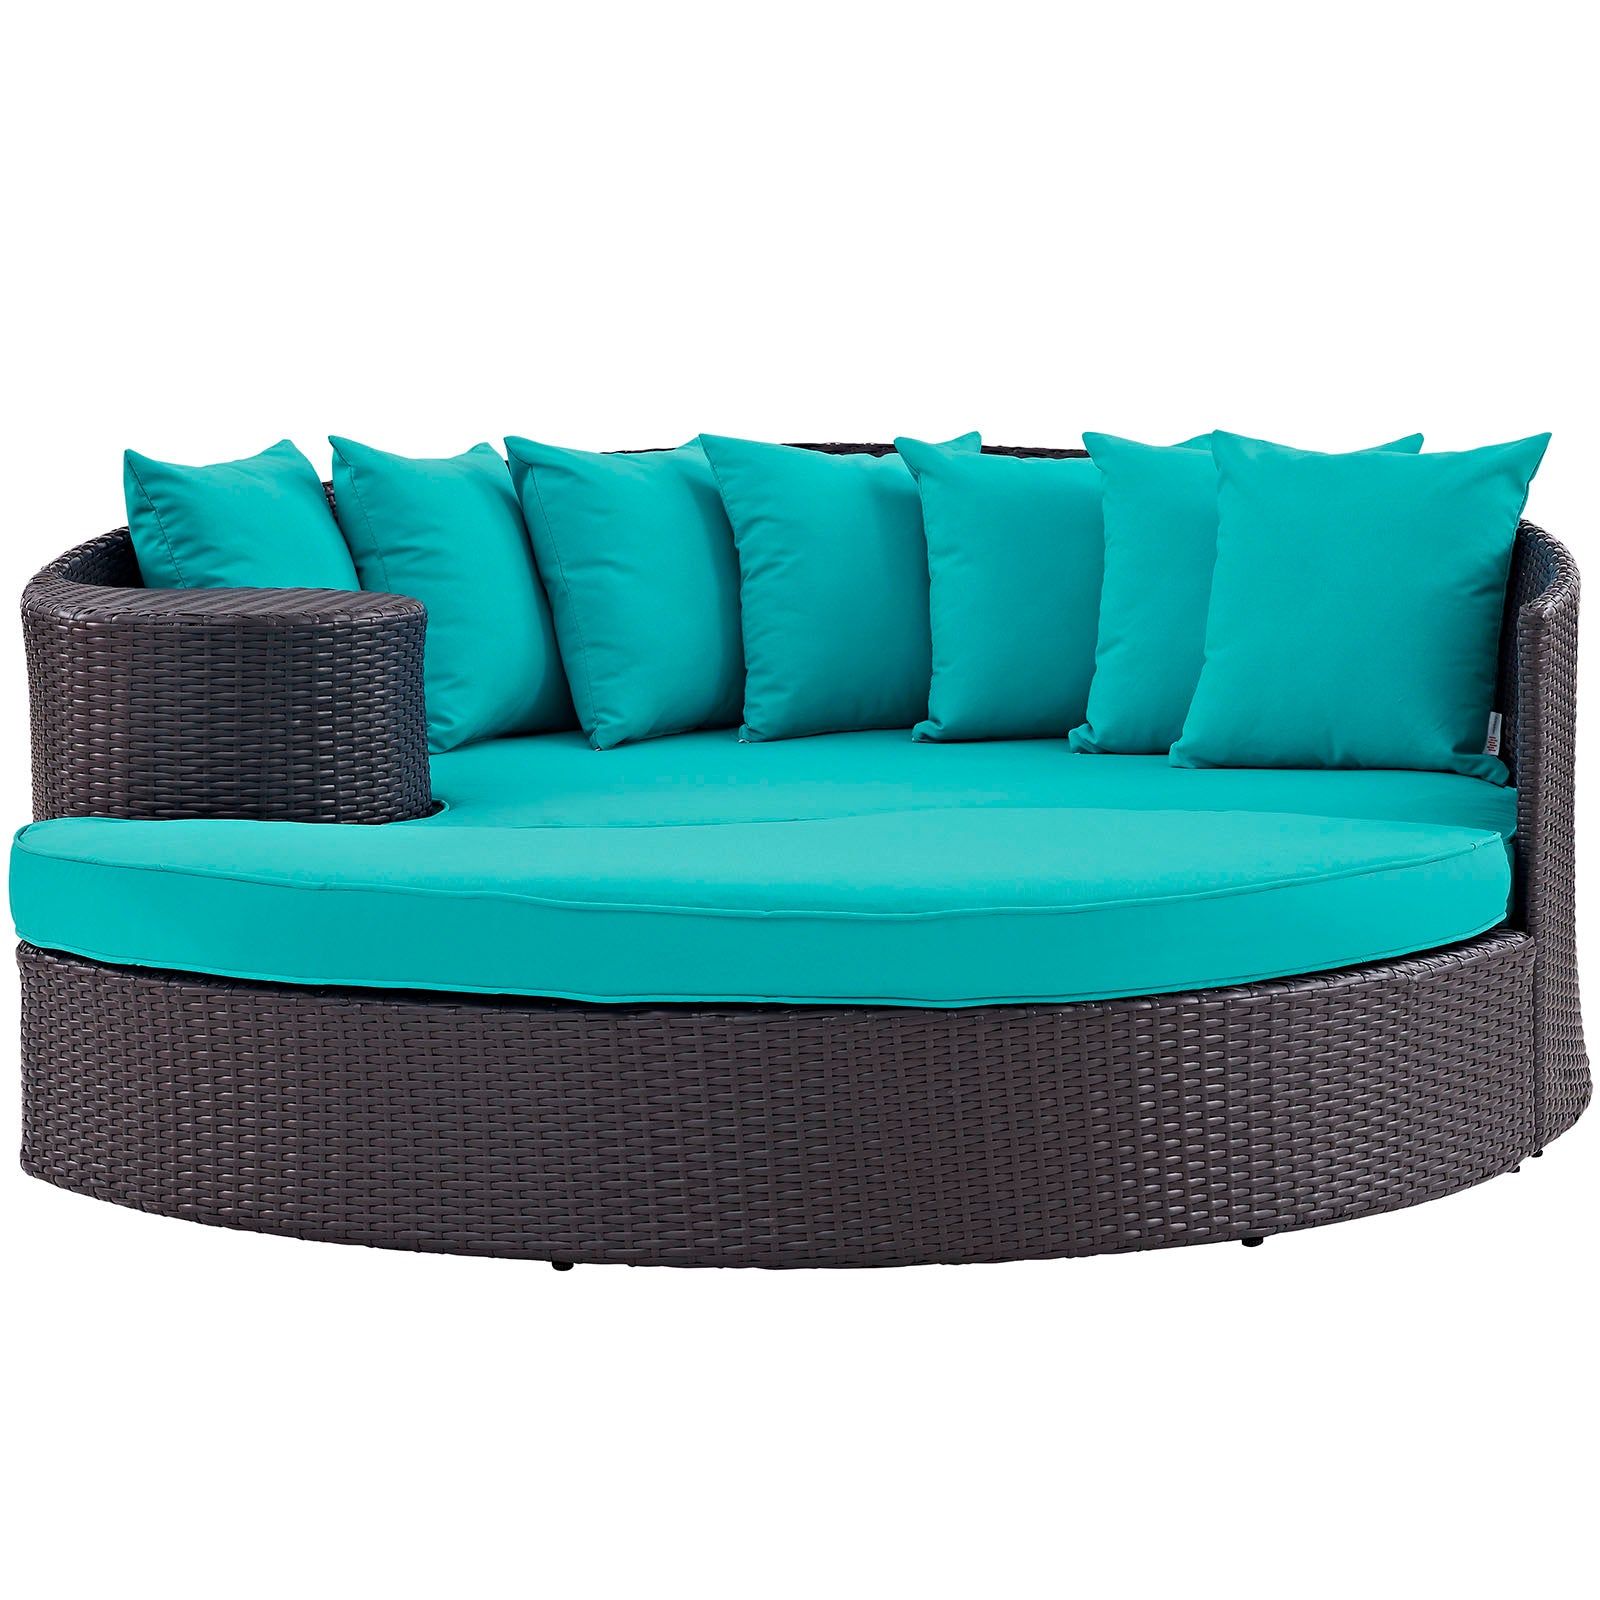 Modway Patio Daybeds - Convene Outdoor Patio Daybed Espresso Turquoise